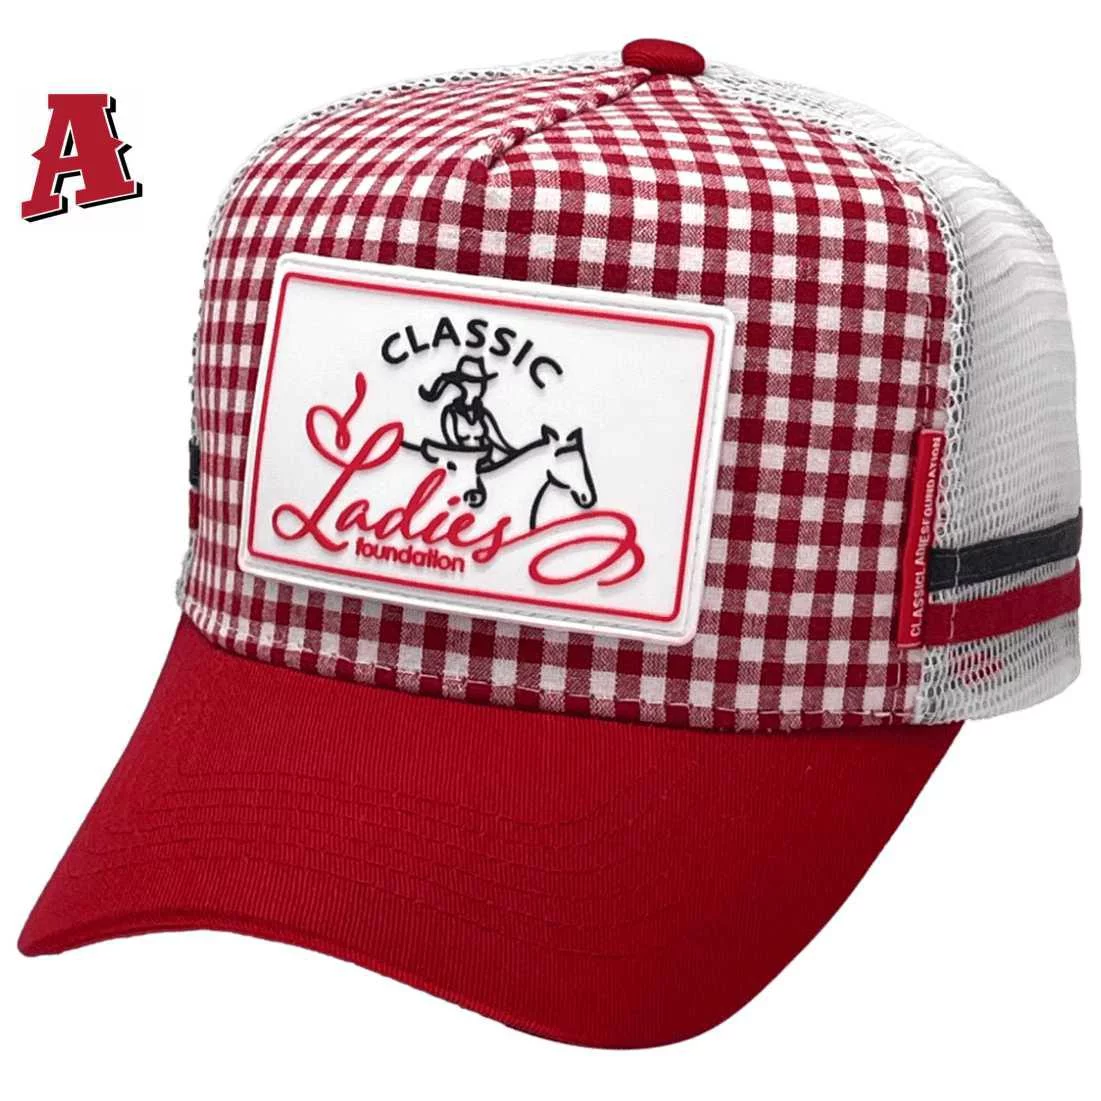 Classic Ladies Foundation Australia Midrange Aussie Trucker Hat HP with Double Side Bands and Rubber Badge Decoration in Red White Gingham Crown